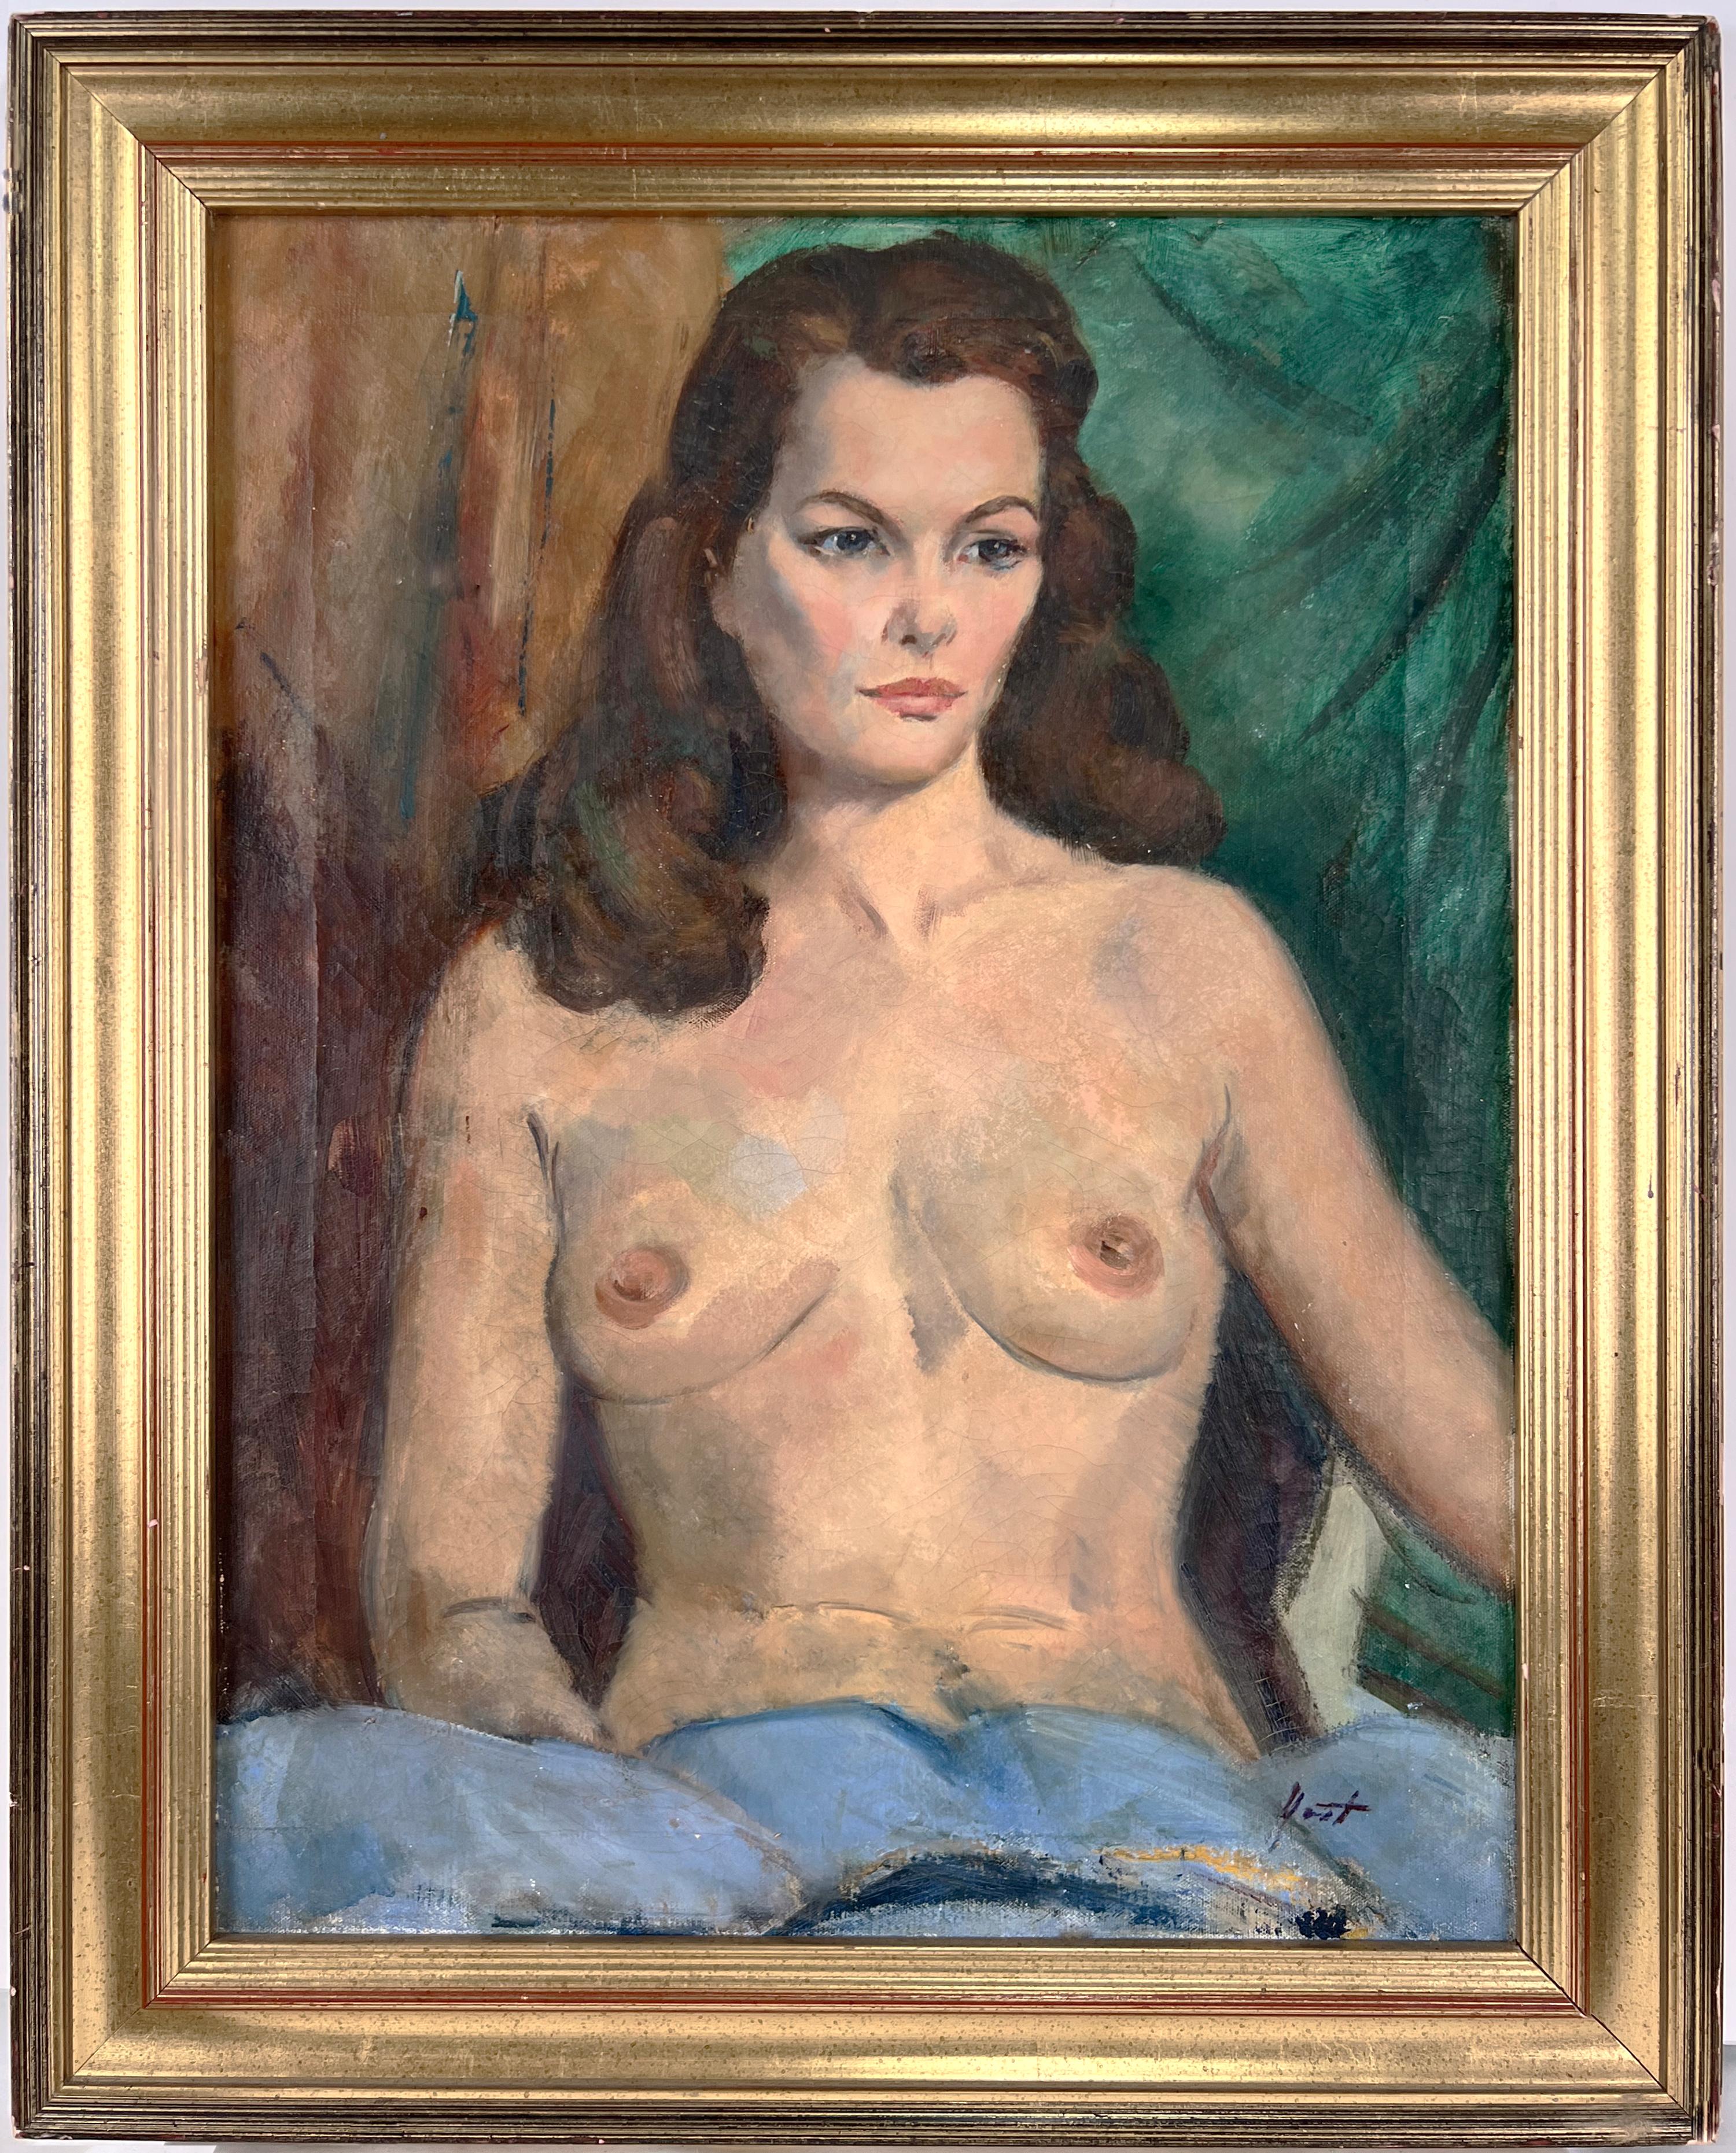 Frederick Yost Figurative Painting - Seated Nude Woman American Impressionist School 1940s by Fred Yost 